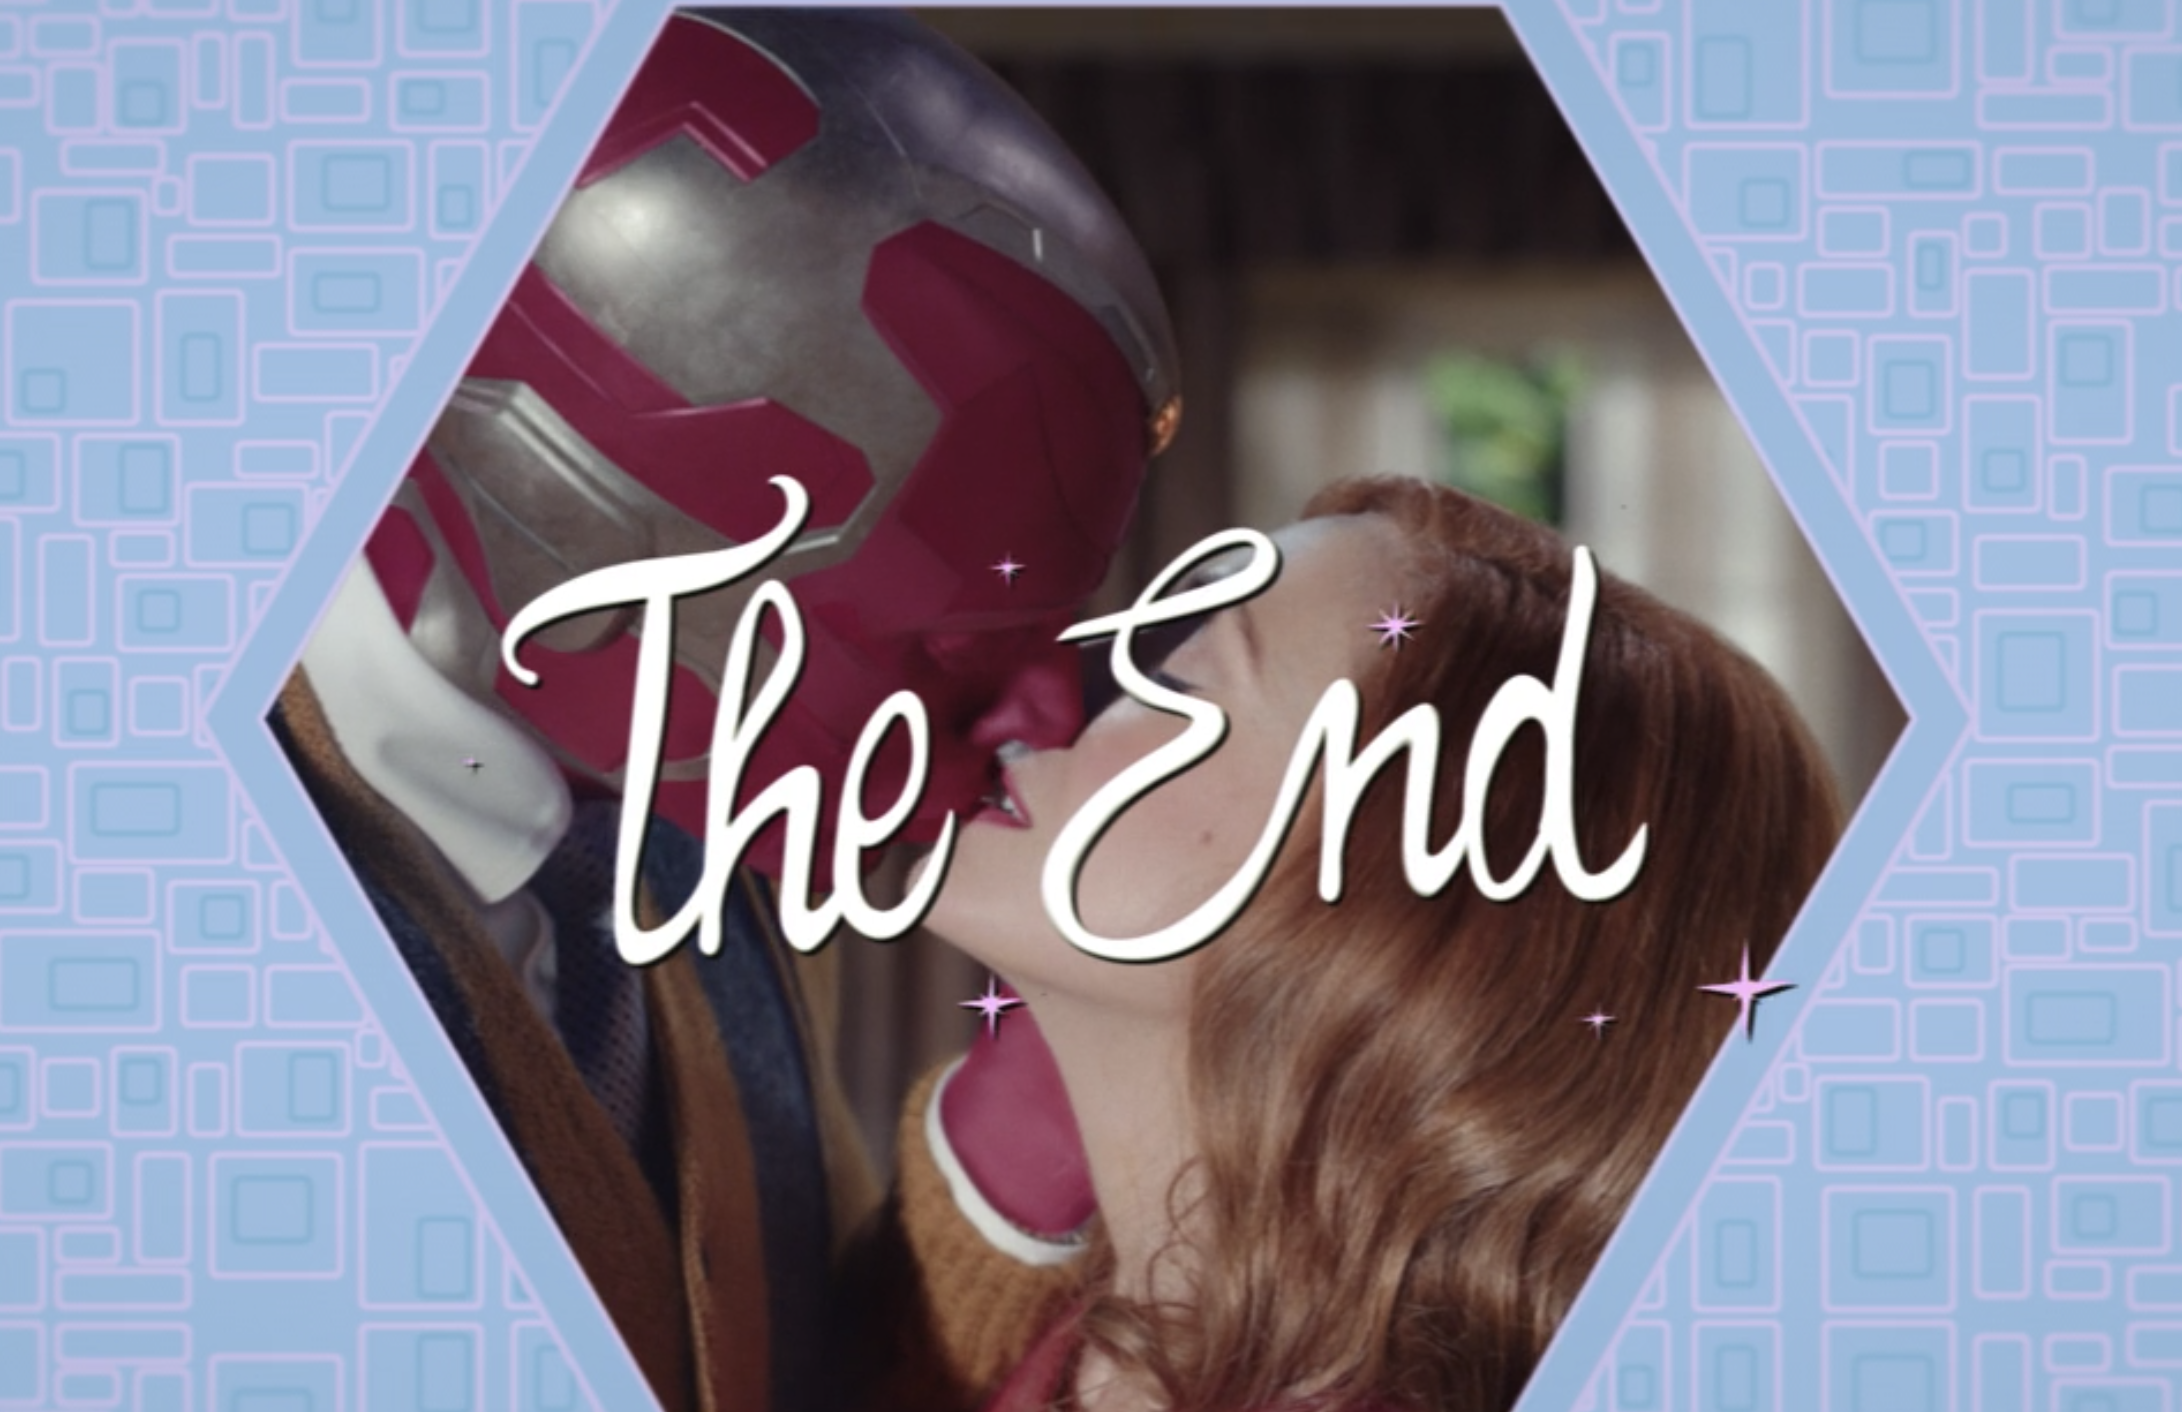 Vision and Wanda kissing with &quot;The End&quot; written over the image